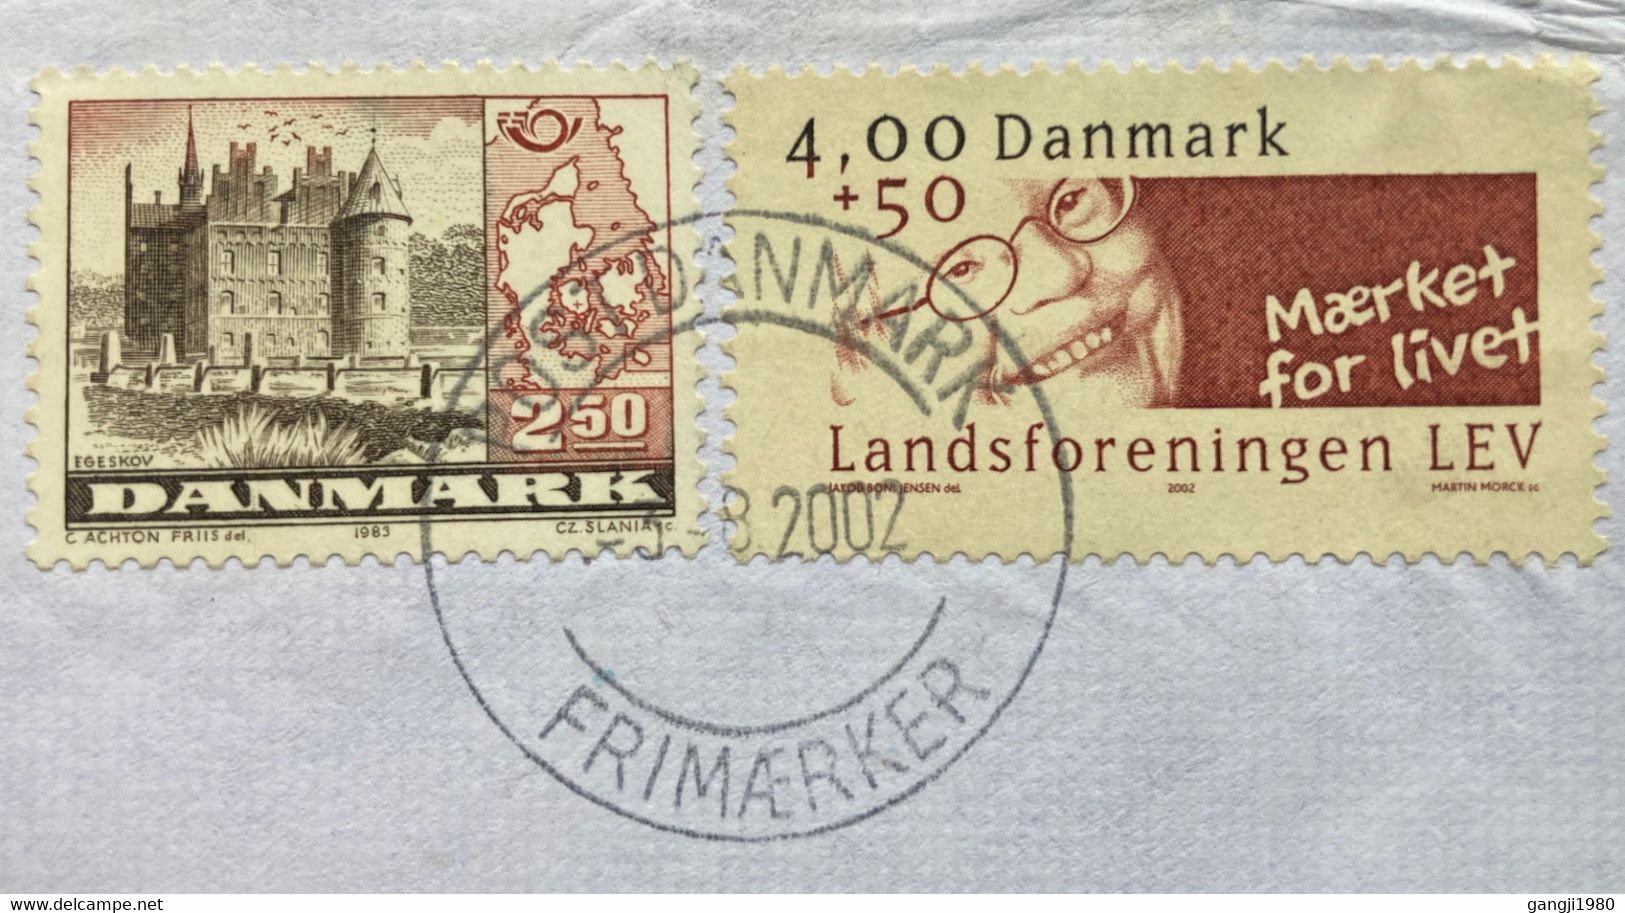 DENMARK 2002, SPECIAL MUSEUM CANCELLATION,VIGNETTE PRIORITAIRE LABEL,BUILDING,ARCHITECTURE,COVER TO INDIA - Lettres & Documents